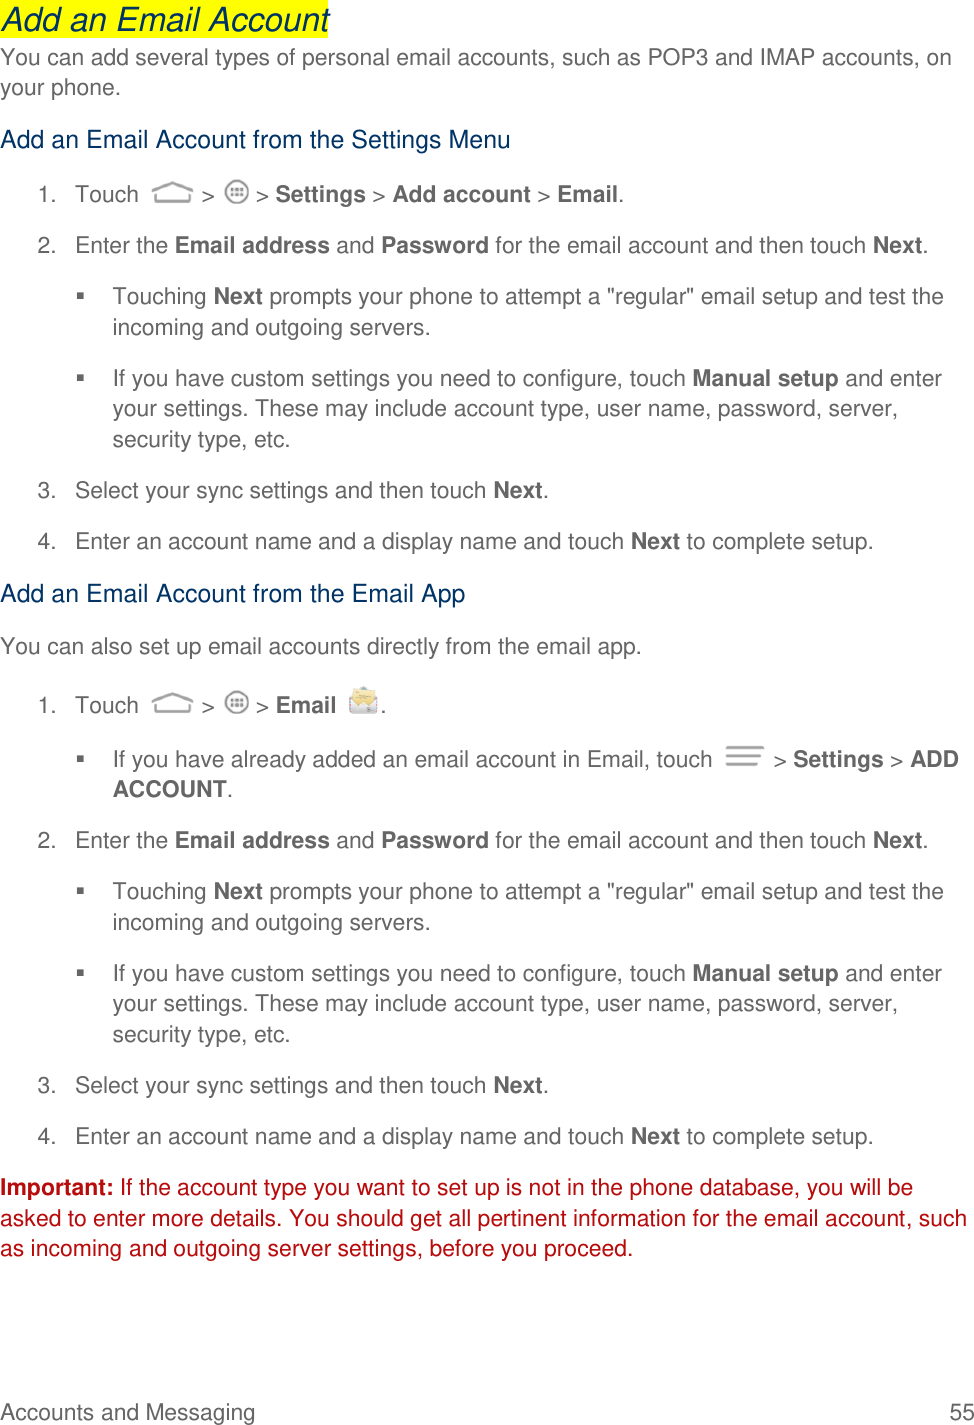 Accounts and Messaging  55 Add an Email Account You can add several types of personal email accounts, such as POP3 and IMAP accounts, on your phone. Add an Email Account from the Settings Menu 1.  Touch   &gt;   &gt; Settings &gt; Add account &gt; Email. 2.  Enter the Email address and Password for the email account and then touch Next.   Touching Next prompts your phone to attempt a &quot;regular&quot; email setup and test the incoming and outgoing servers.    If you have custom settings you need to configure, touch Manual setup and enter your settings. These may include account type, user name, password, server, security type, etc. 3.  Select your sync settings and then touch Next.  4.  Enter an account name and a display name and touch Next to complete setup. Add an Email Account from the Email App You can also set up email accounts directly from the email app. 1.  Touch   &gt;   &gt; Email  .   If you have already added an email account in Email, touch   &gt; Settings &gt; ADD ACCOUNT.  2.  Enter the Email address and Password for the email account and then touch Next.   Touching Next prompts your phone to attempt a &quot;regular&quot; email setup and test the incoming and outgoing servers.    If you have custom settings you need to configure, touch Manual setup and enter your settings. These may include account type, user name, password, server, security type, etc. 3.  Select your sync settings and then touch Next.  4.  Enter an account name and a display name and touch Next to complete setup. Important: If the account type you want to set up is not in the phone database, you will be asked to enter more details. You should get all pertinent information for the email account, such as incoming and outgoing server settings, before you proceed. 